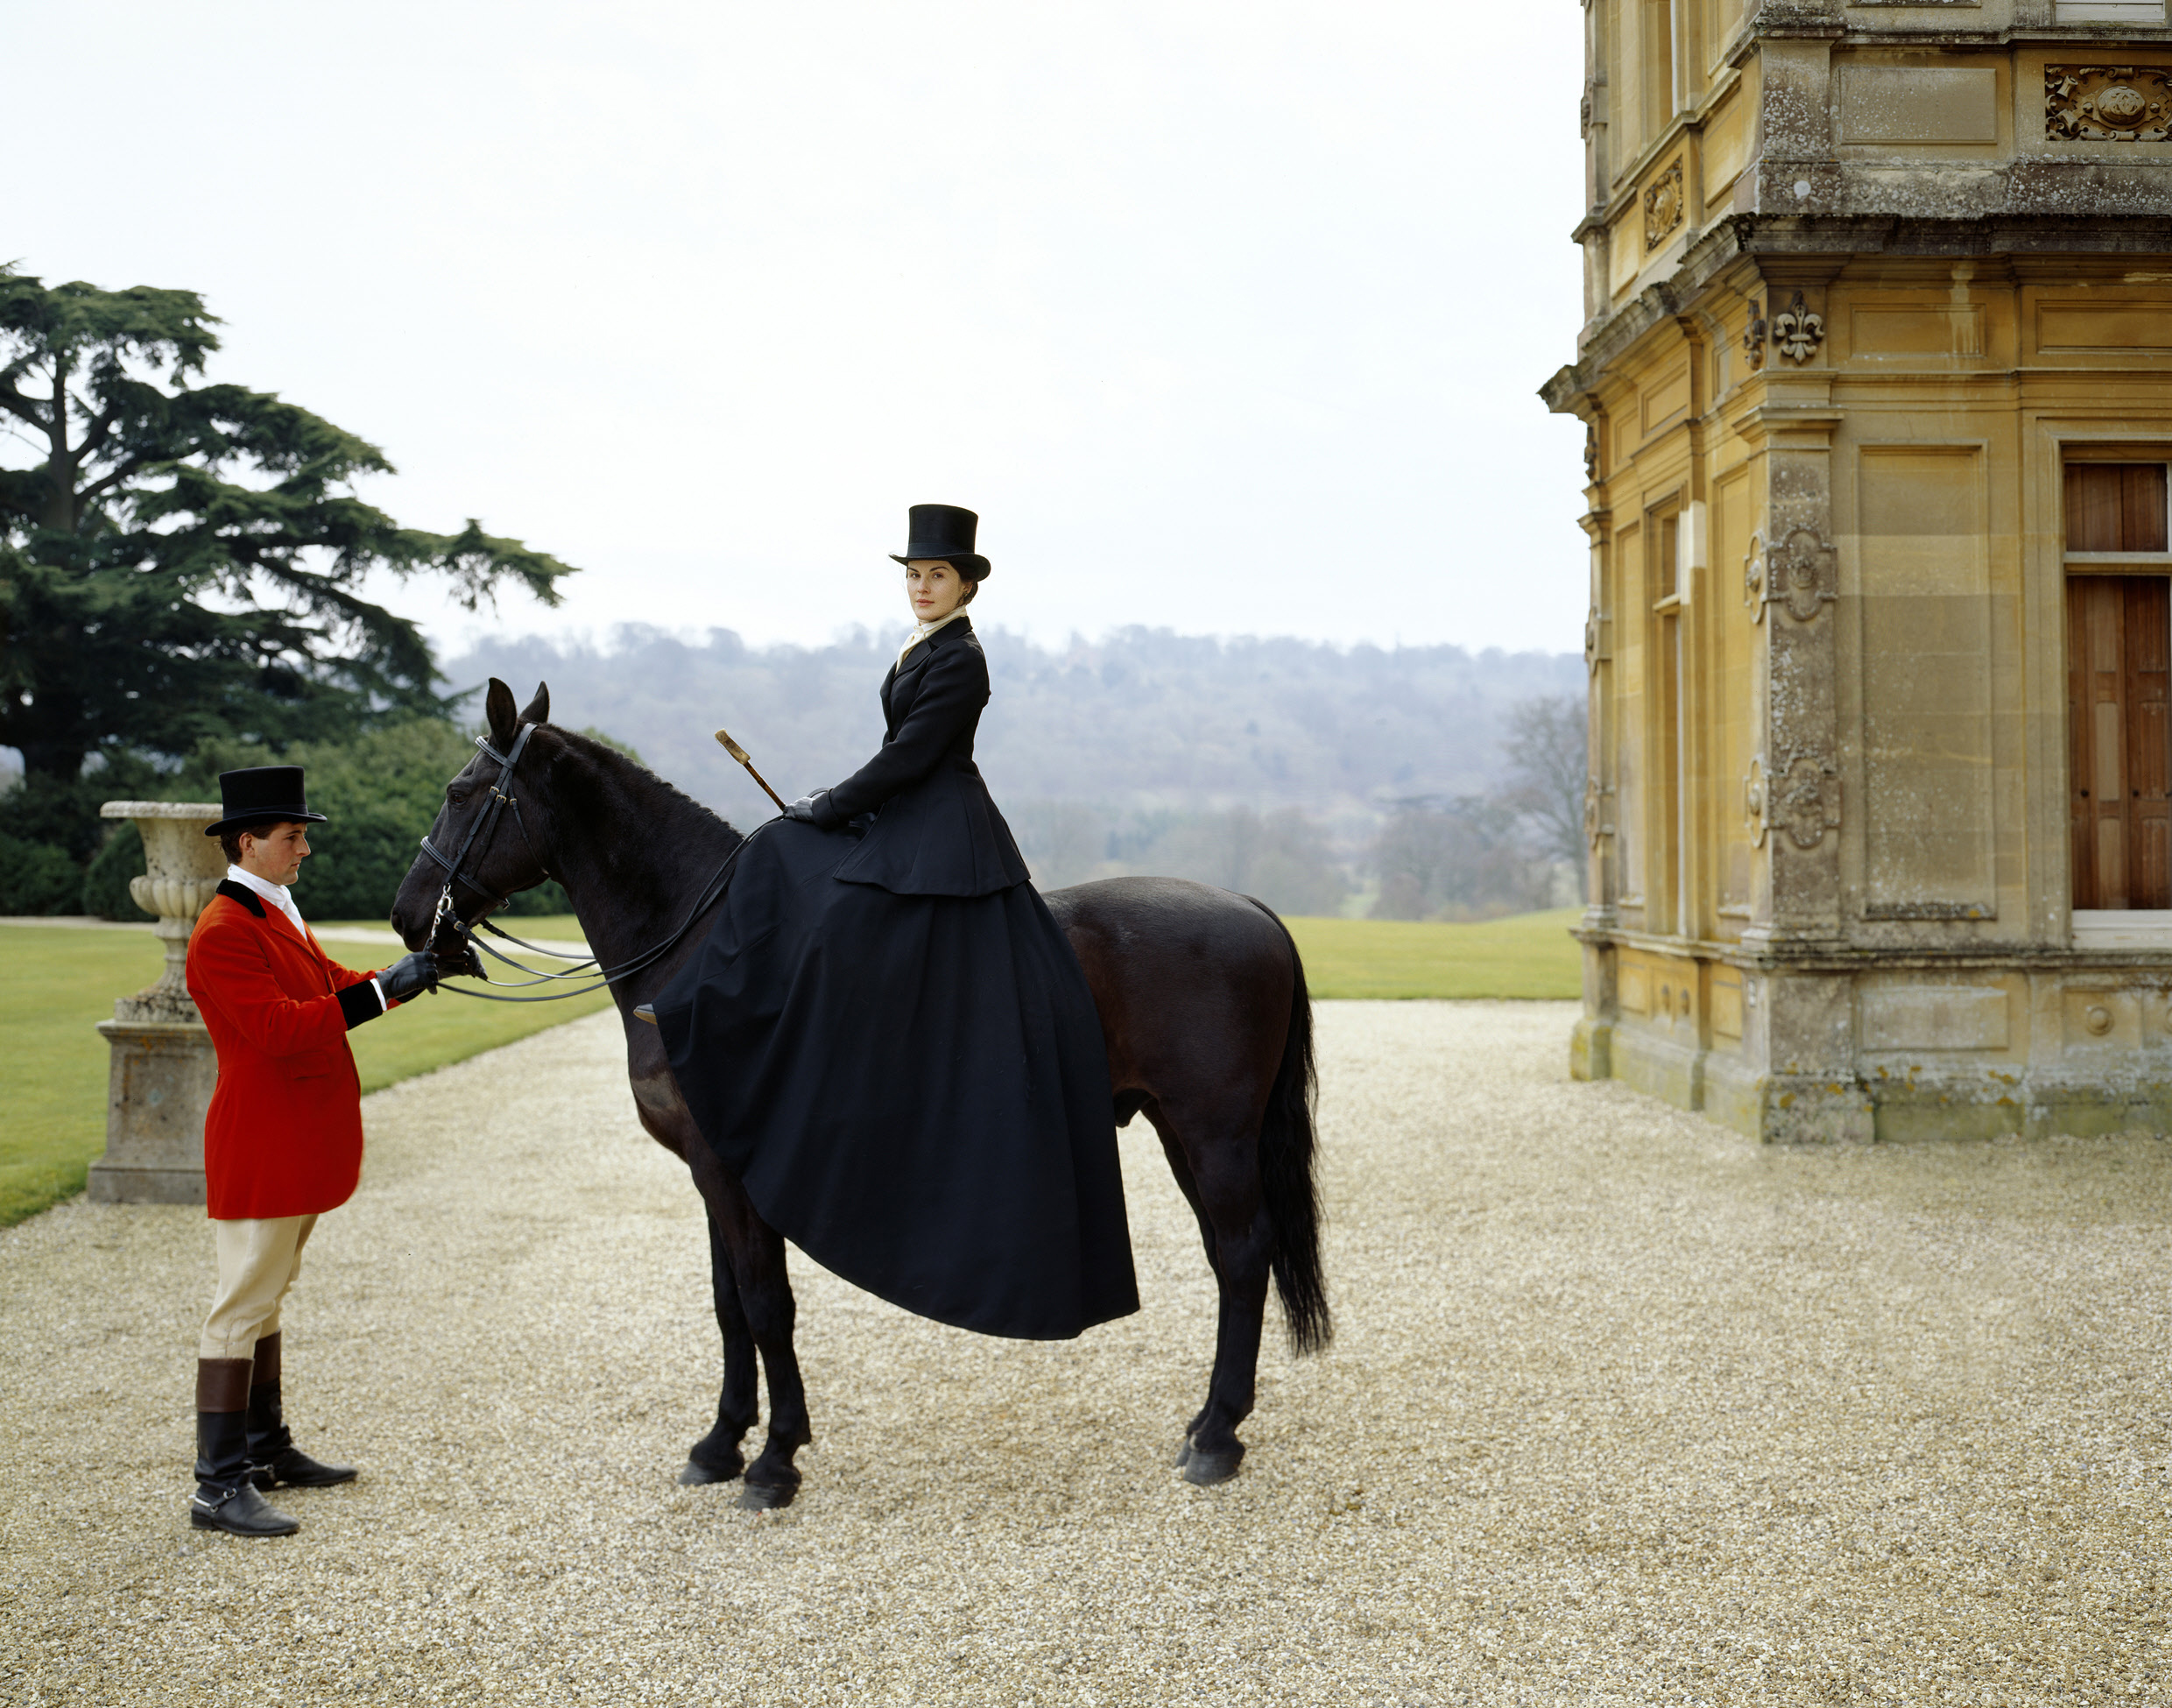 <p>Speaking of riding habits... <a href="https://www.wonderwall.com/celebrity/profiles/overview/michelle-dockery-1488.article">Michelle Dockery</a> pulled of a major mounted fashion moment as Lady Mary during season 1 of PBS's "Downton Abbey." </p>